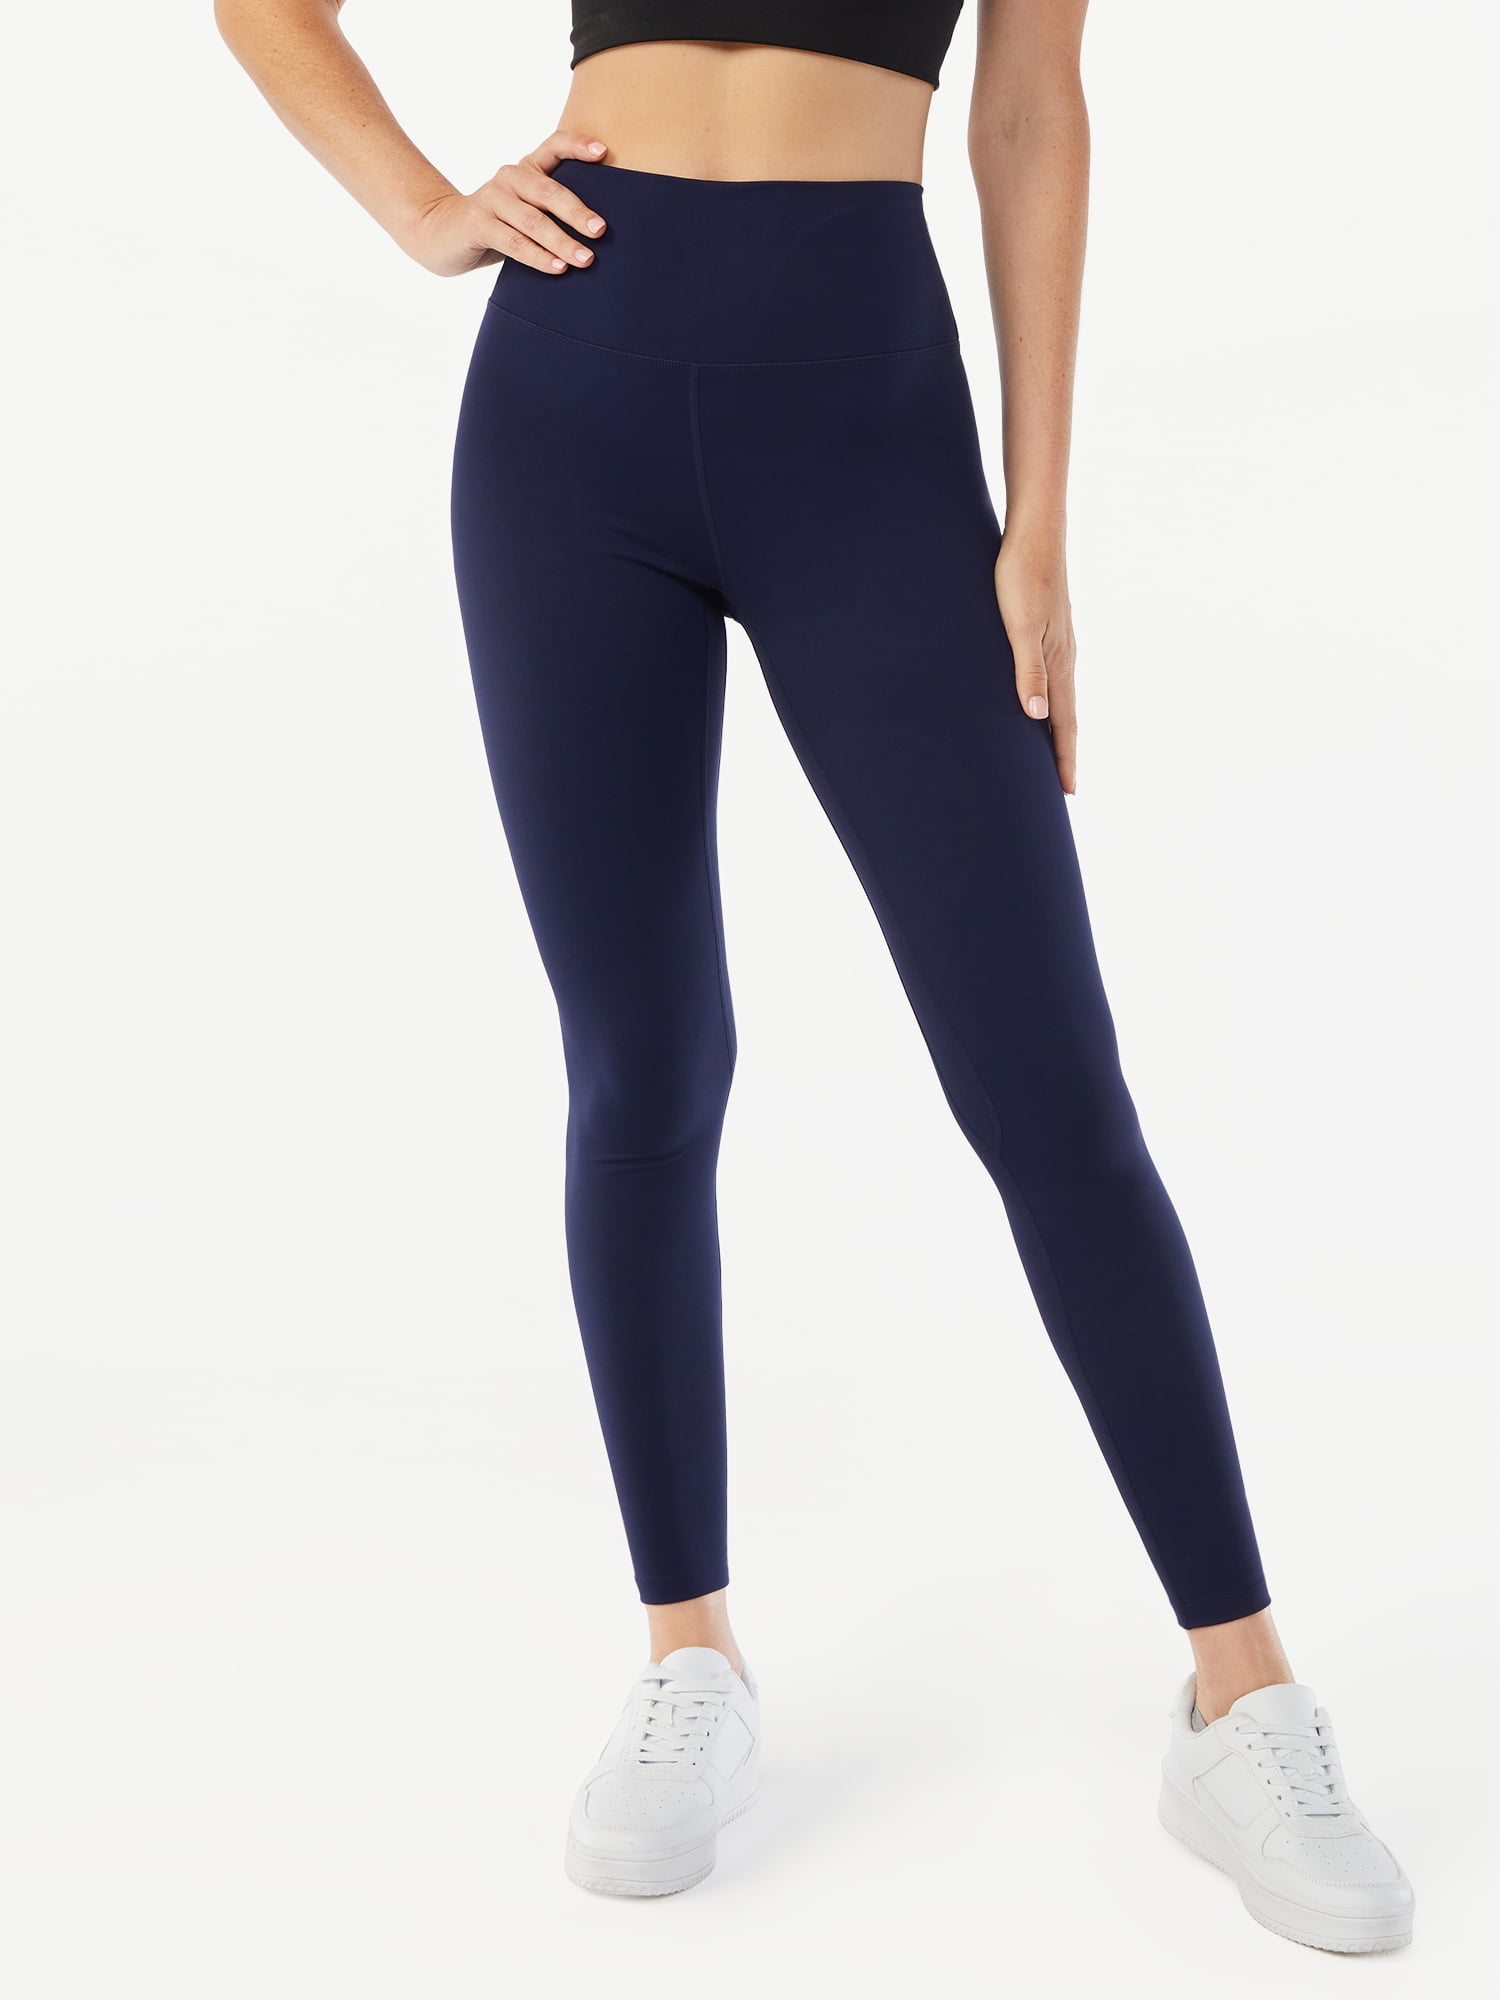 Active Legging With High Waistband